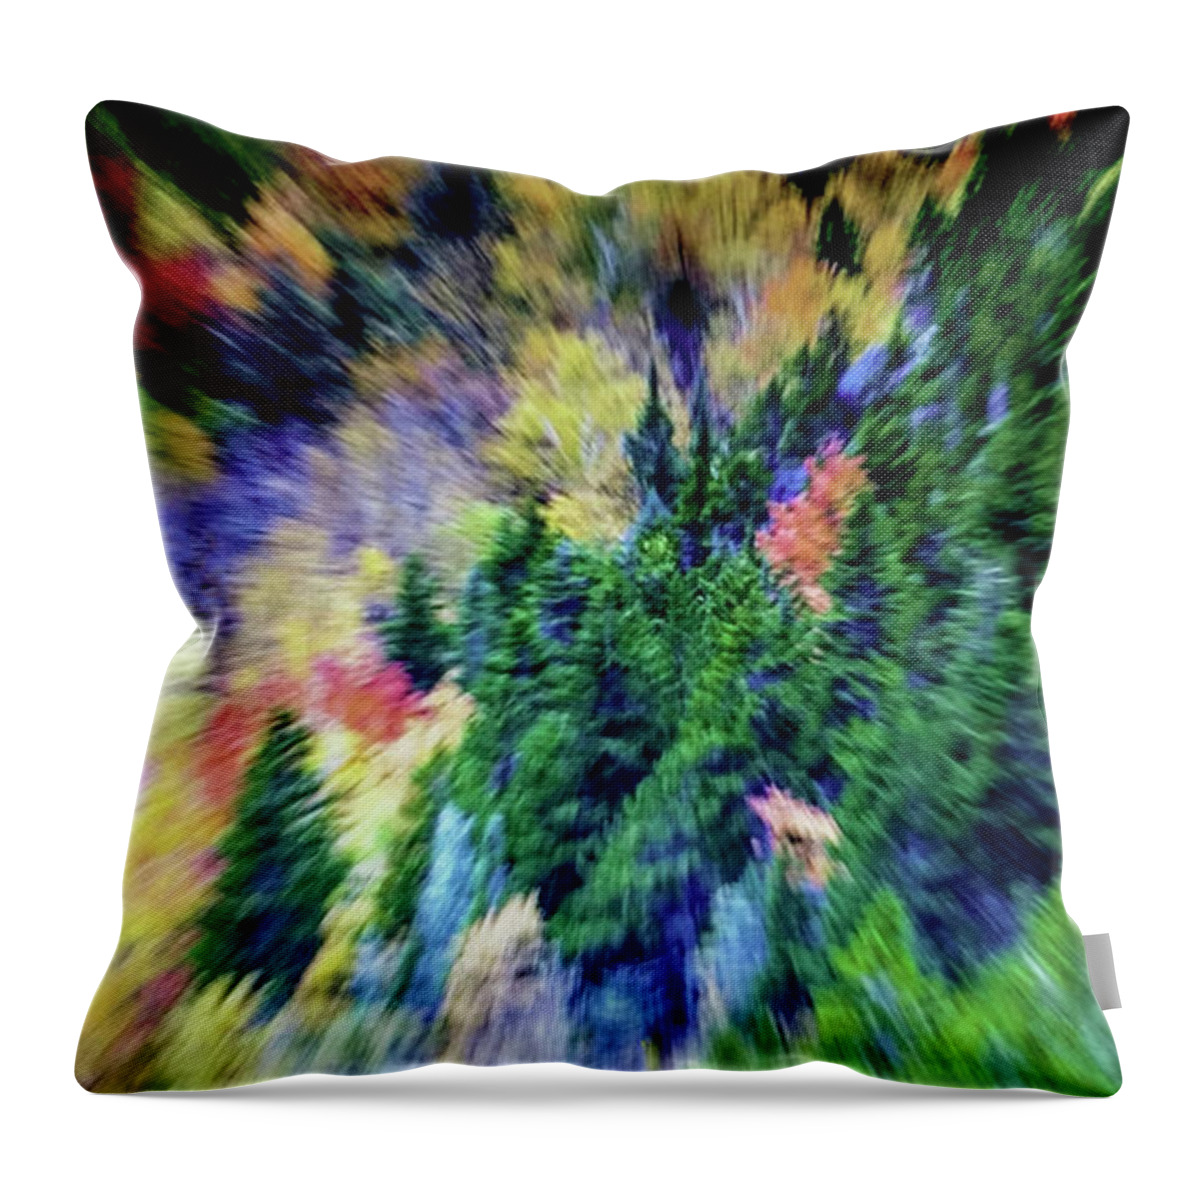 Abstract Throw Pillow featuring the photograph Abstract Forest Photography 5501d1 by Ricardos Creations